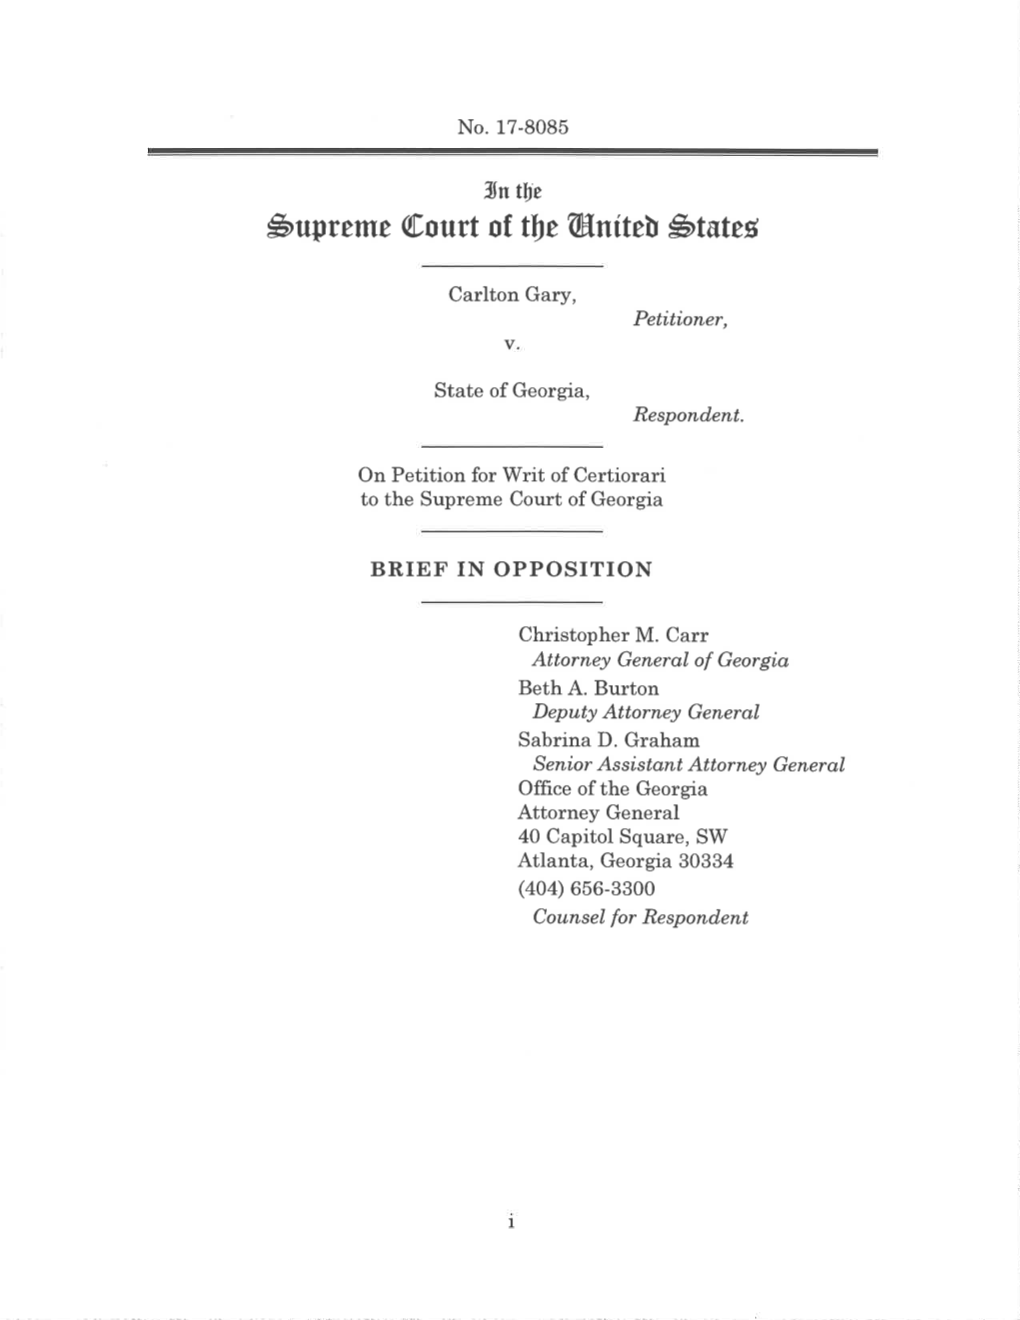 Supreme Court of Tfje ®Nttcb States; BRIEF in OPPOSITION